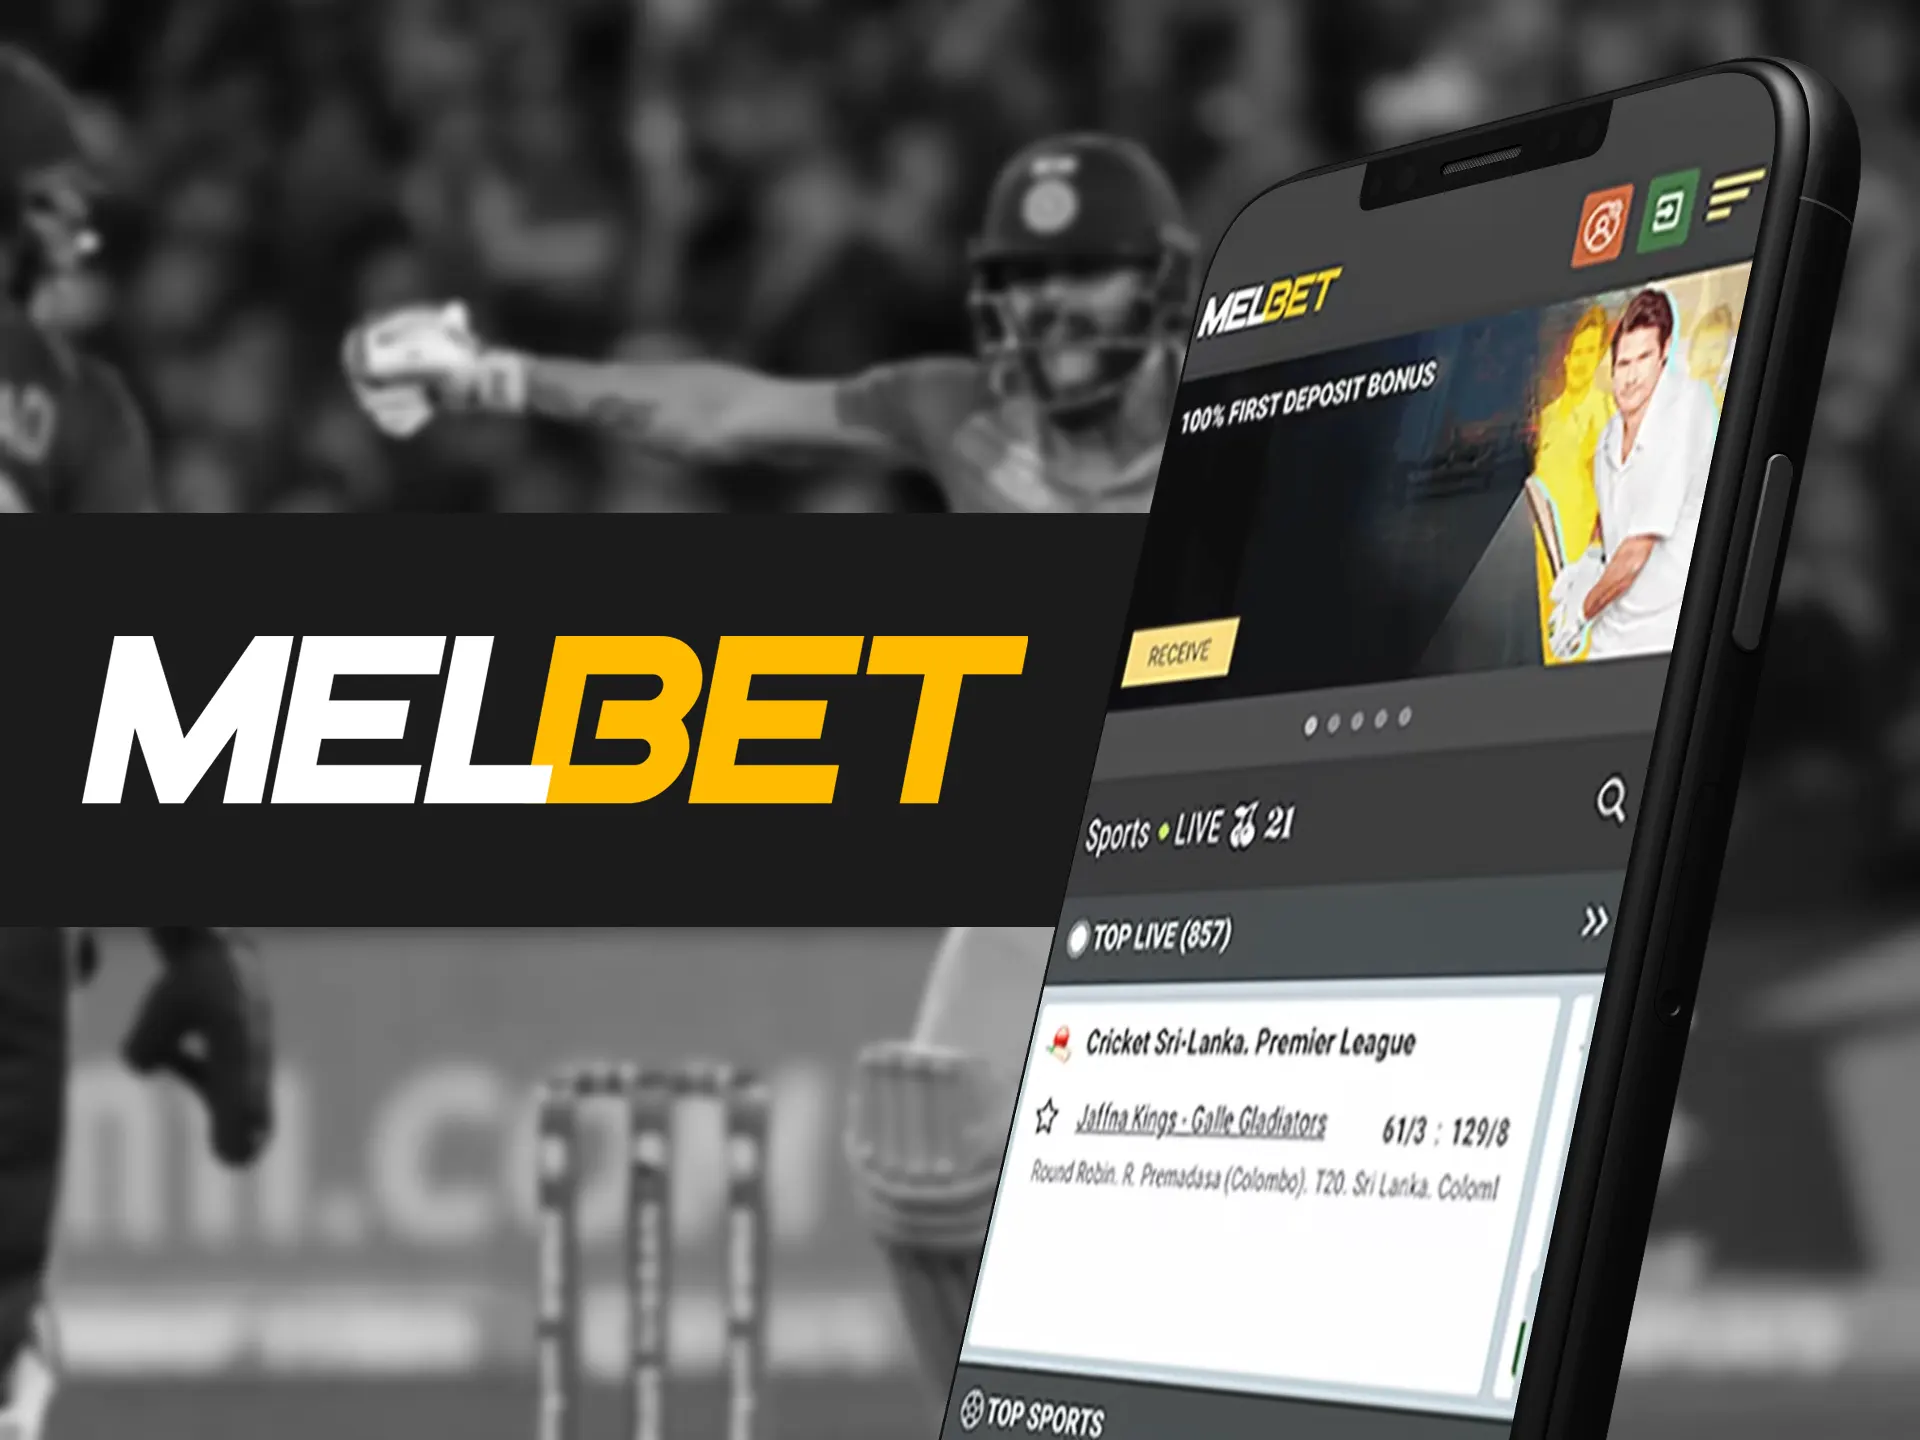 Make bets in Melbet app and win money.